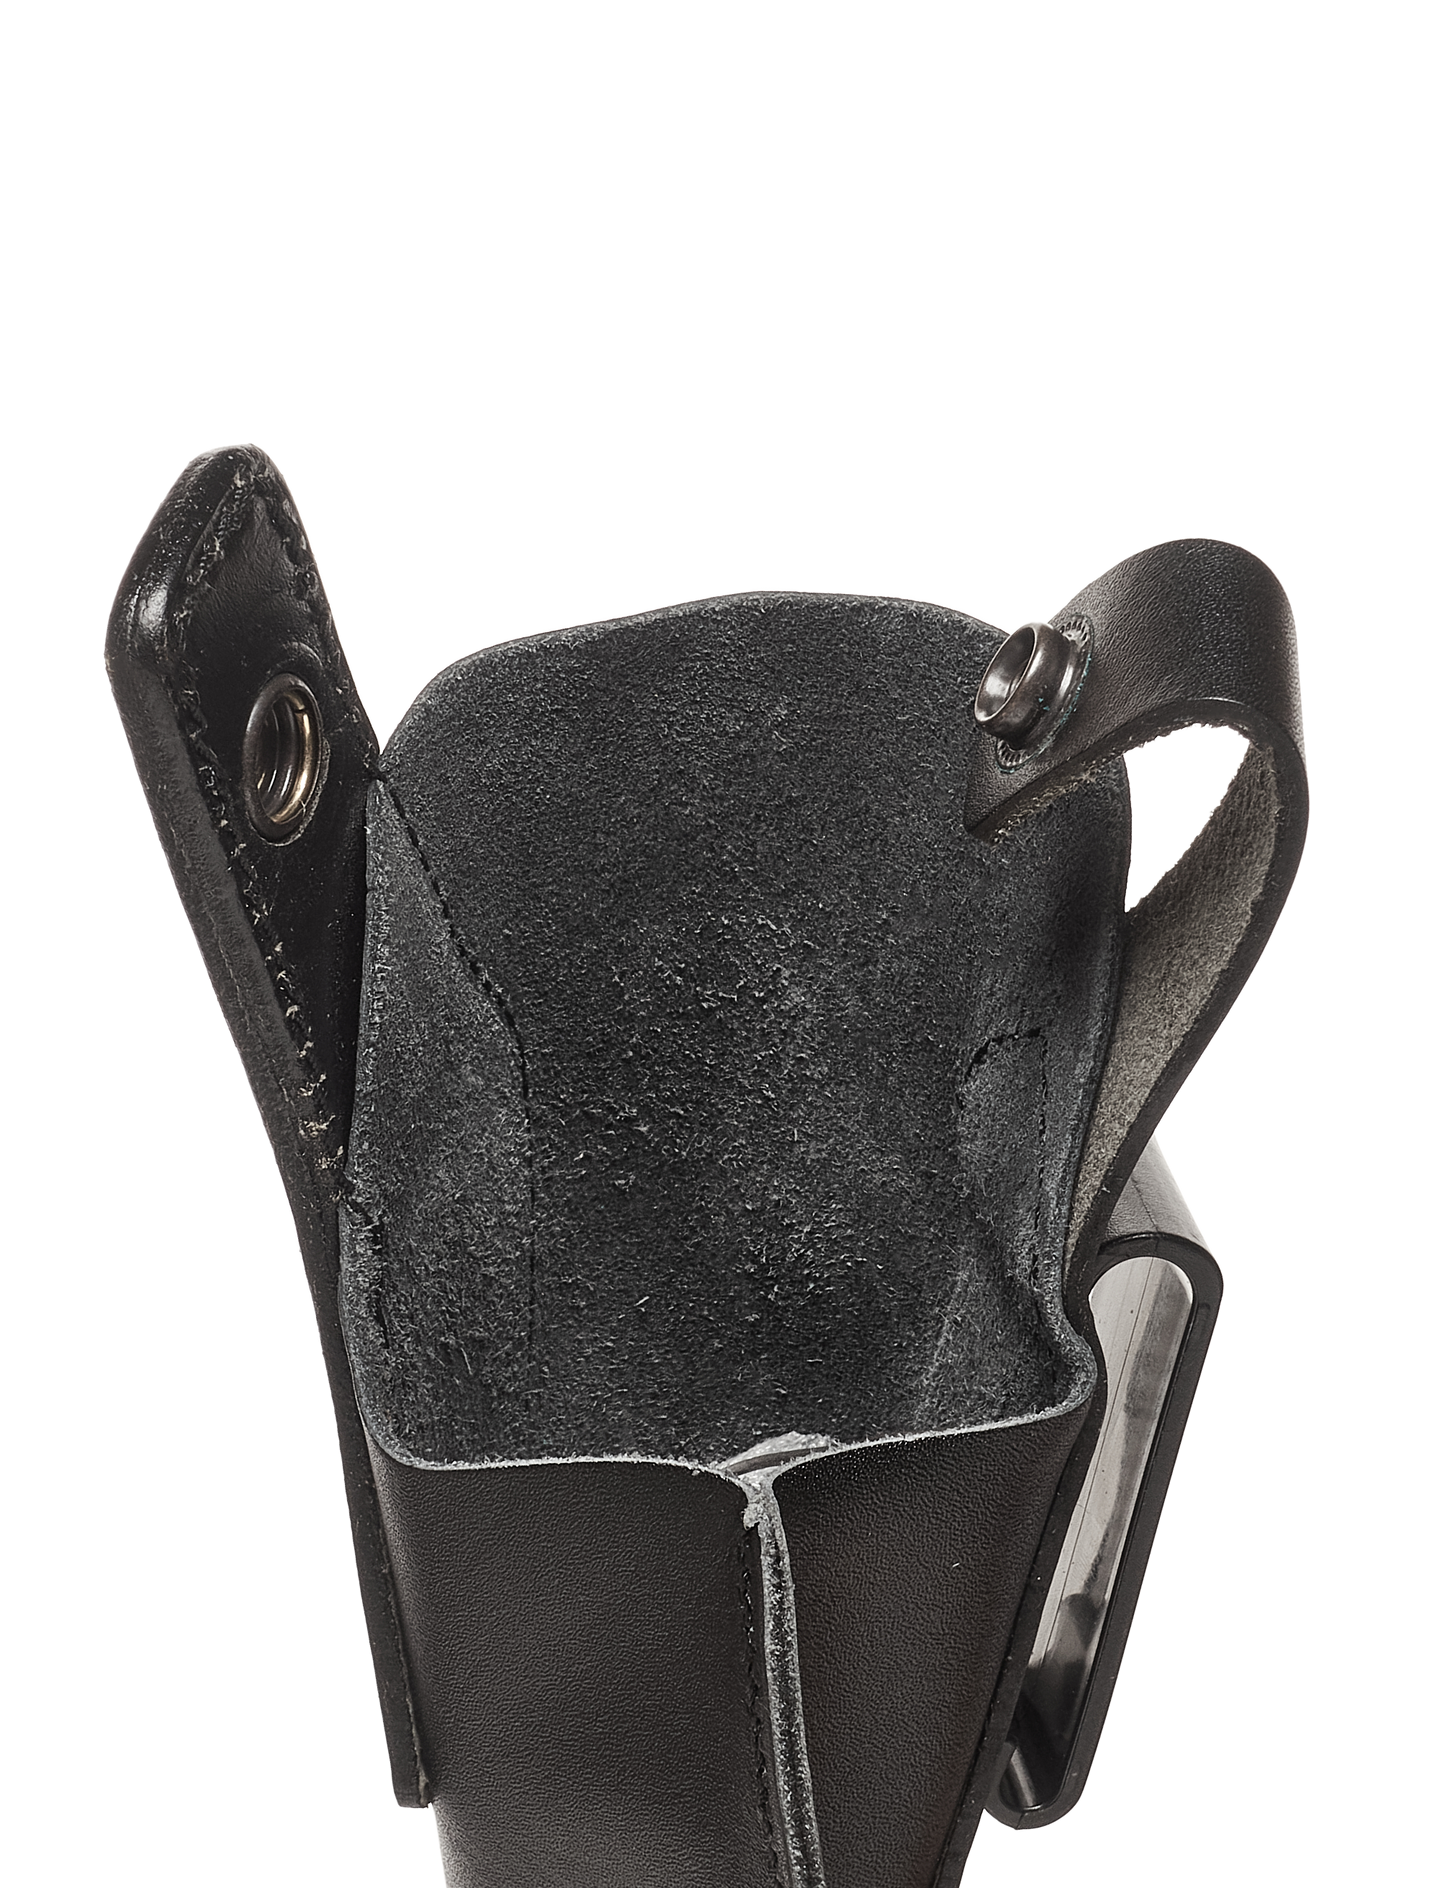 Sarsilmaz Sar9 IWB Leather Holster for Smith & Wesson M&P 9mm.40.45, Leather Holster with Belt Clip (K196)